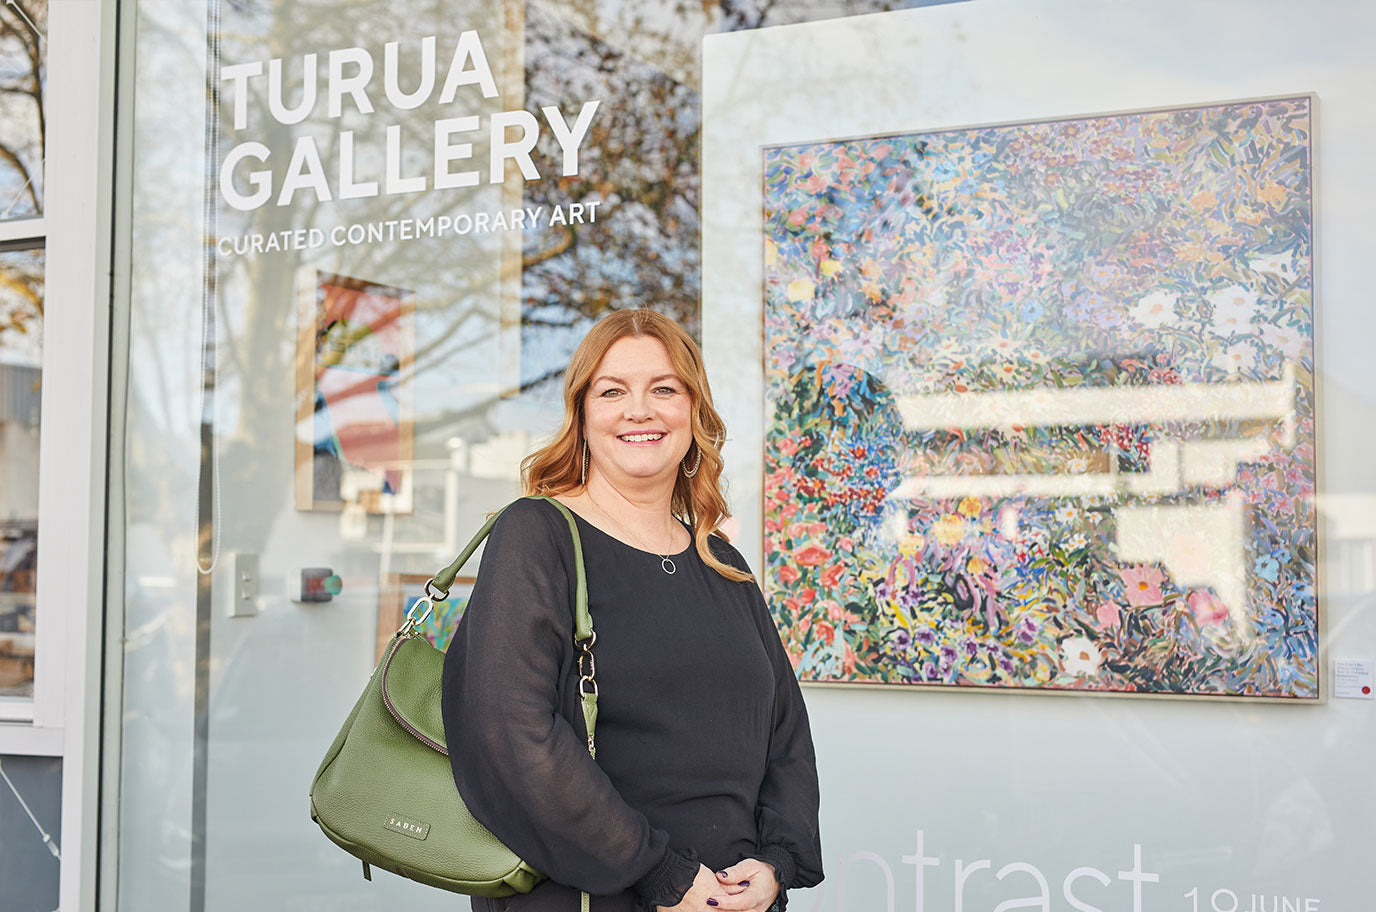 WOMEN IN BUSINESS | Q&A WITH MELISSA FROM TURUA GALLERY